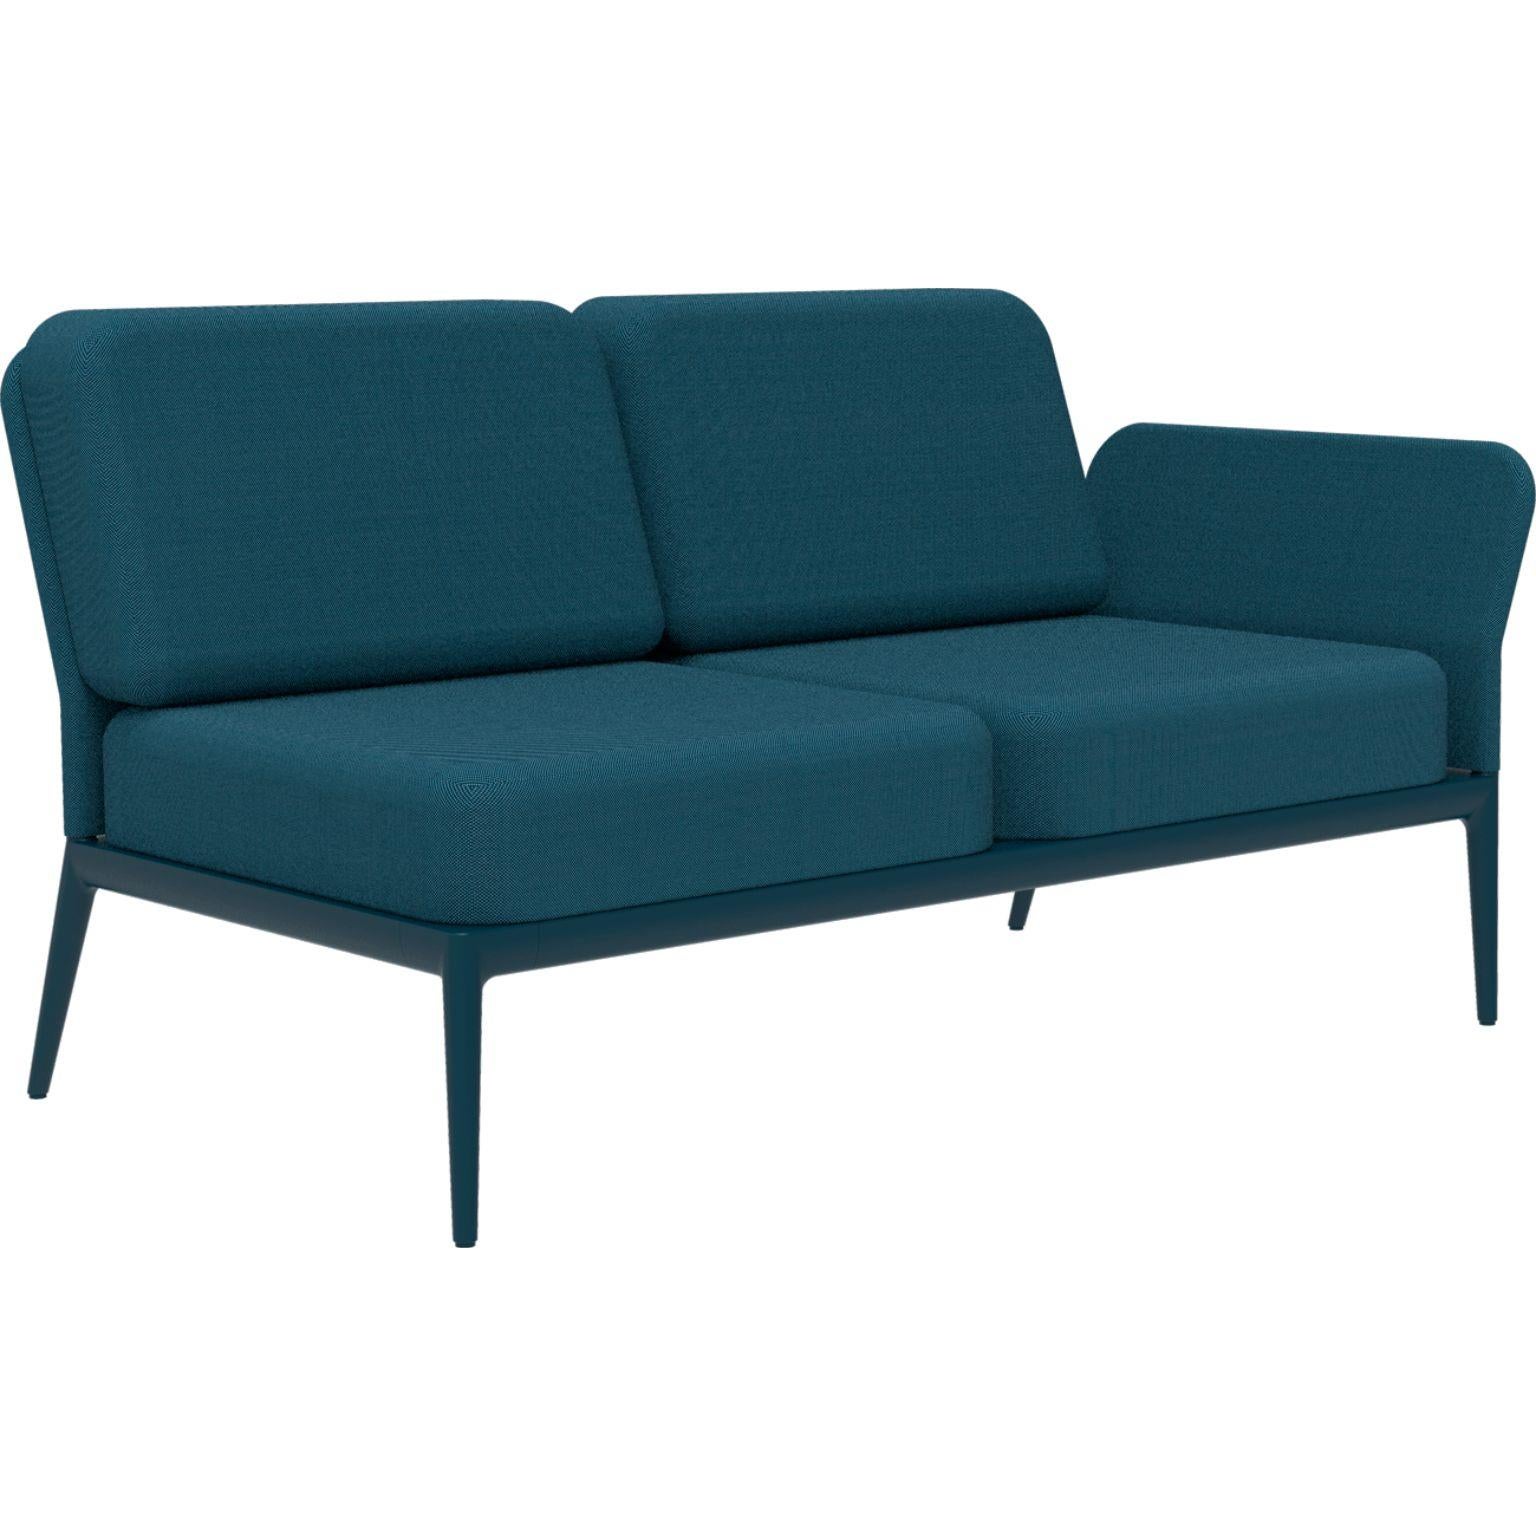 Cover Navy Double Left Modular Sofa by MOWEE
Dimensions: D83 x W148 x H81 cm (seat height 42 cm)
Material: Aluminum and upholstery.
Weight: 29 kg.
Also available in different colors and finishes. Please contact us.

An unmistakable collection